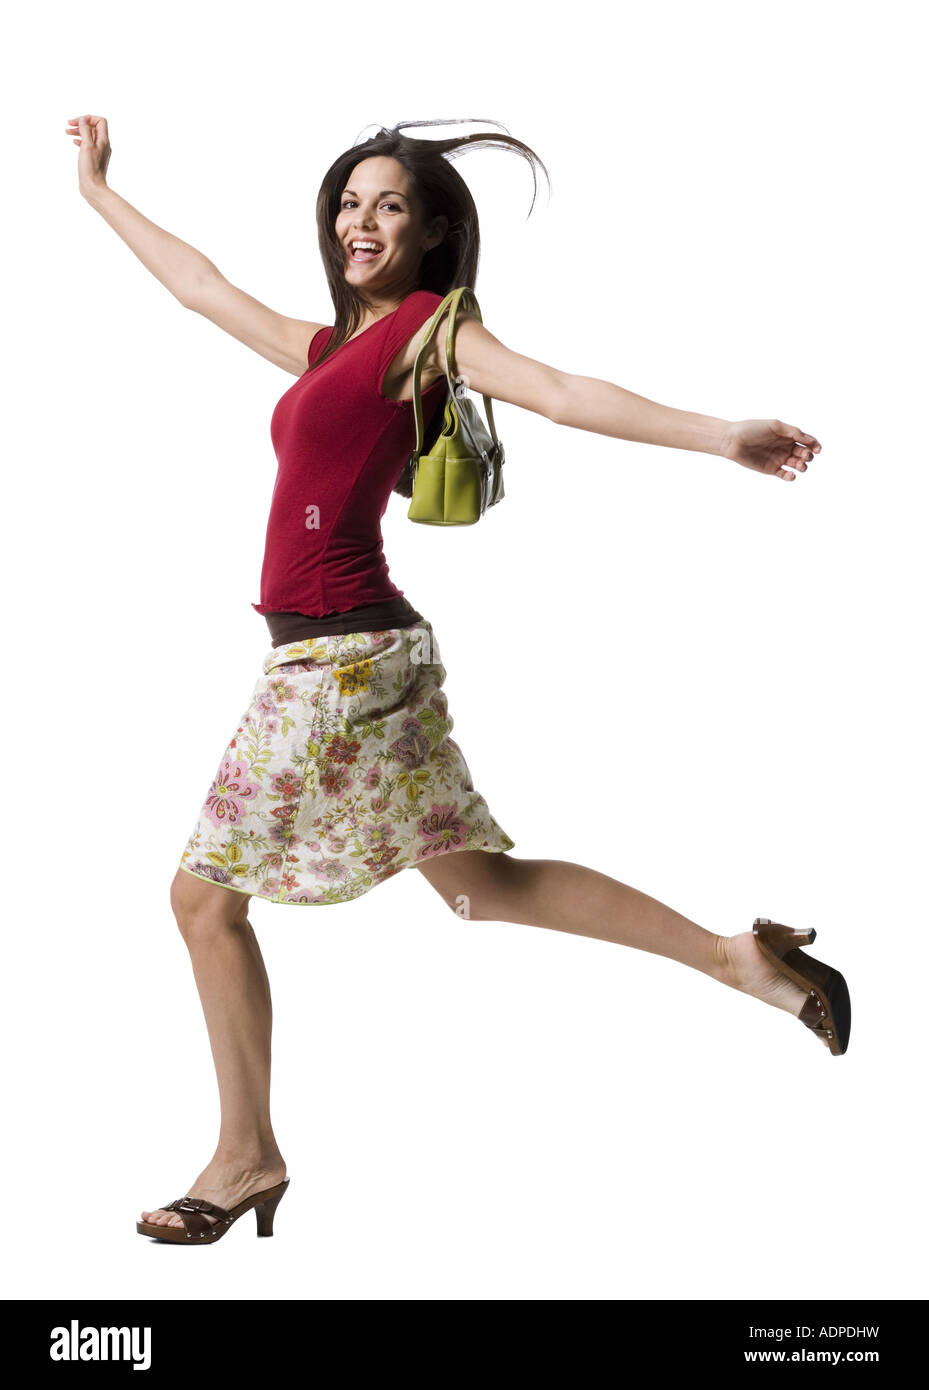 Woman with purse running and smiling Stock Photo